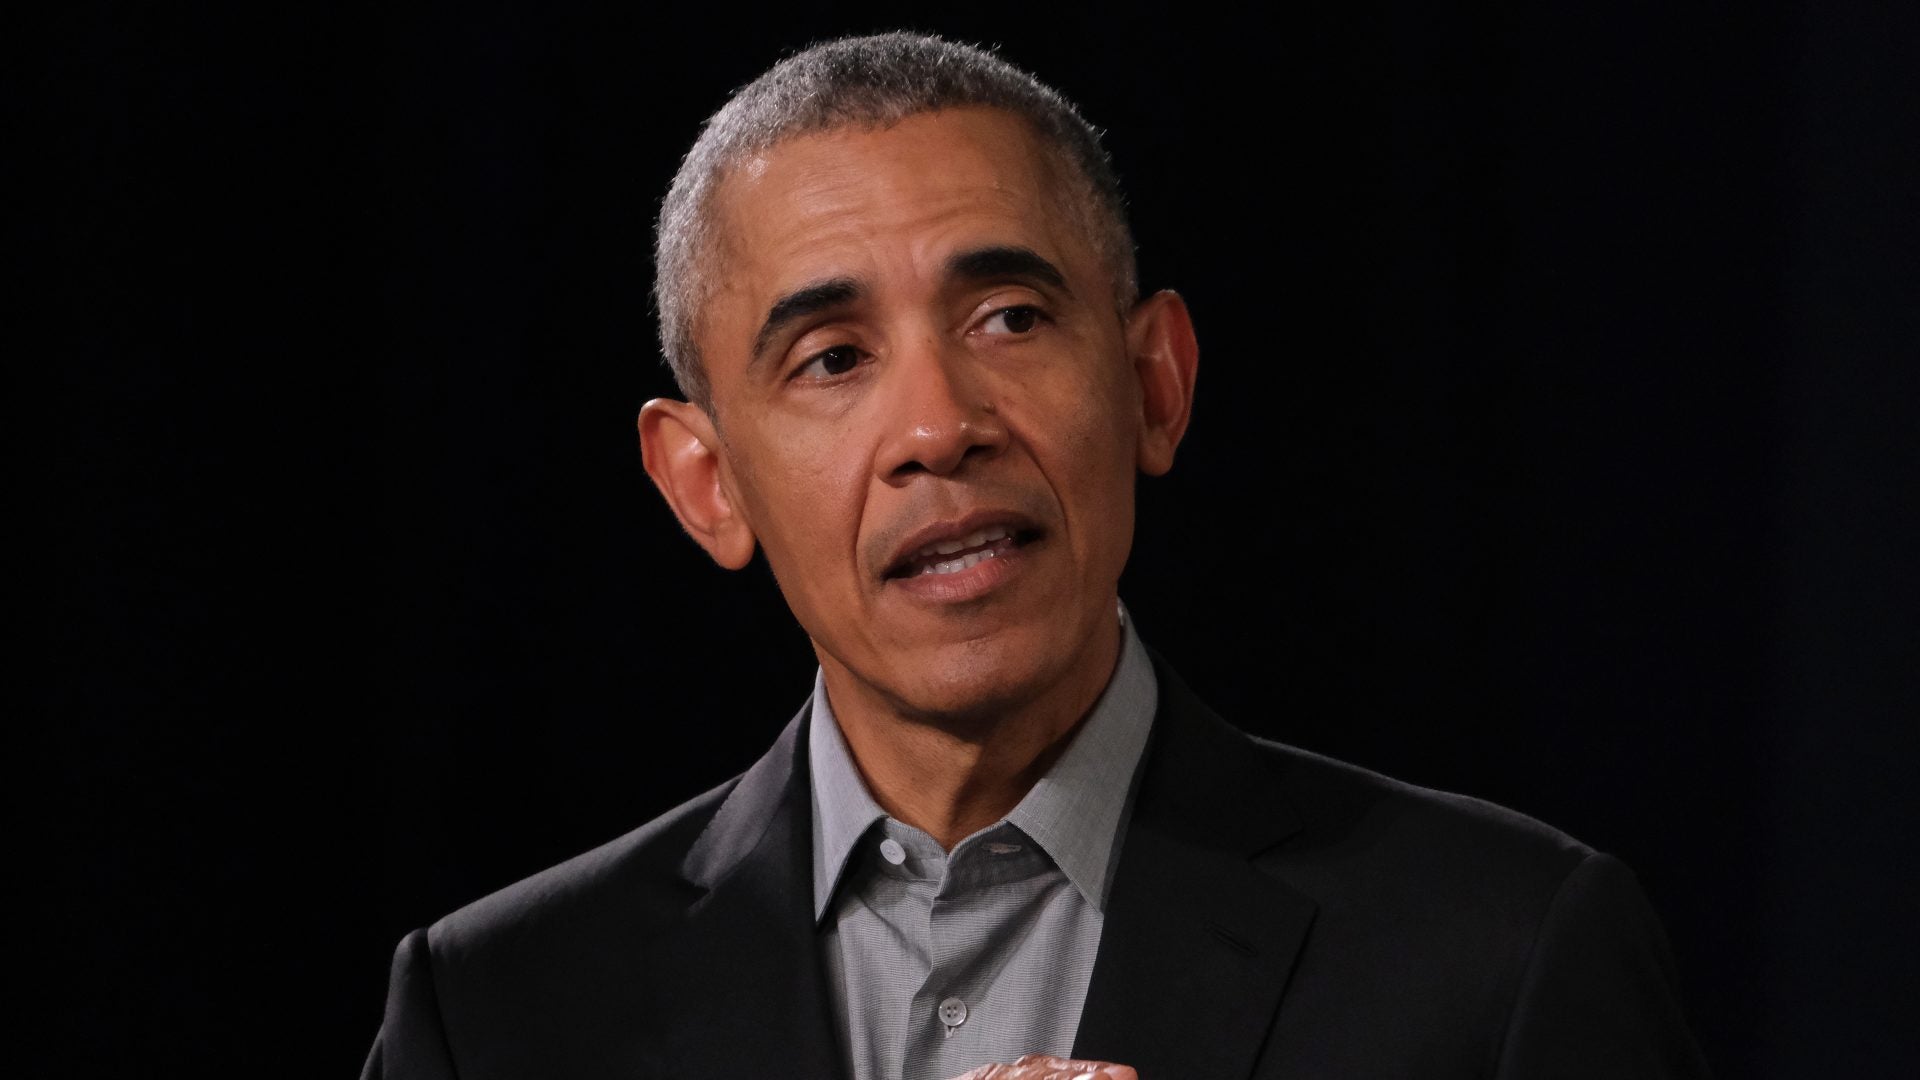 Obama To Trump Super PAC: Stop Twisting My Words